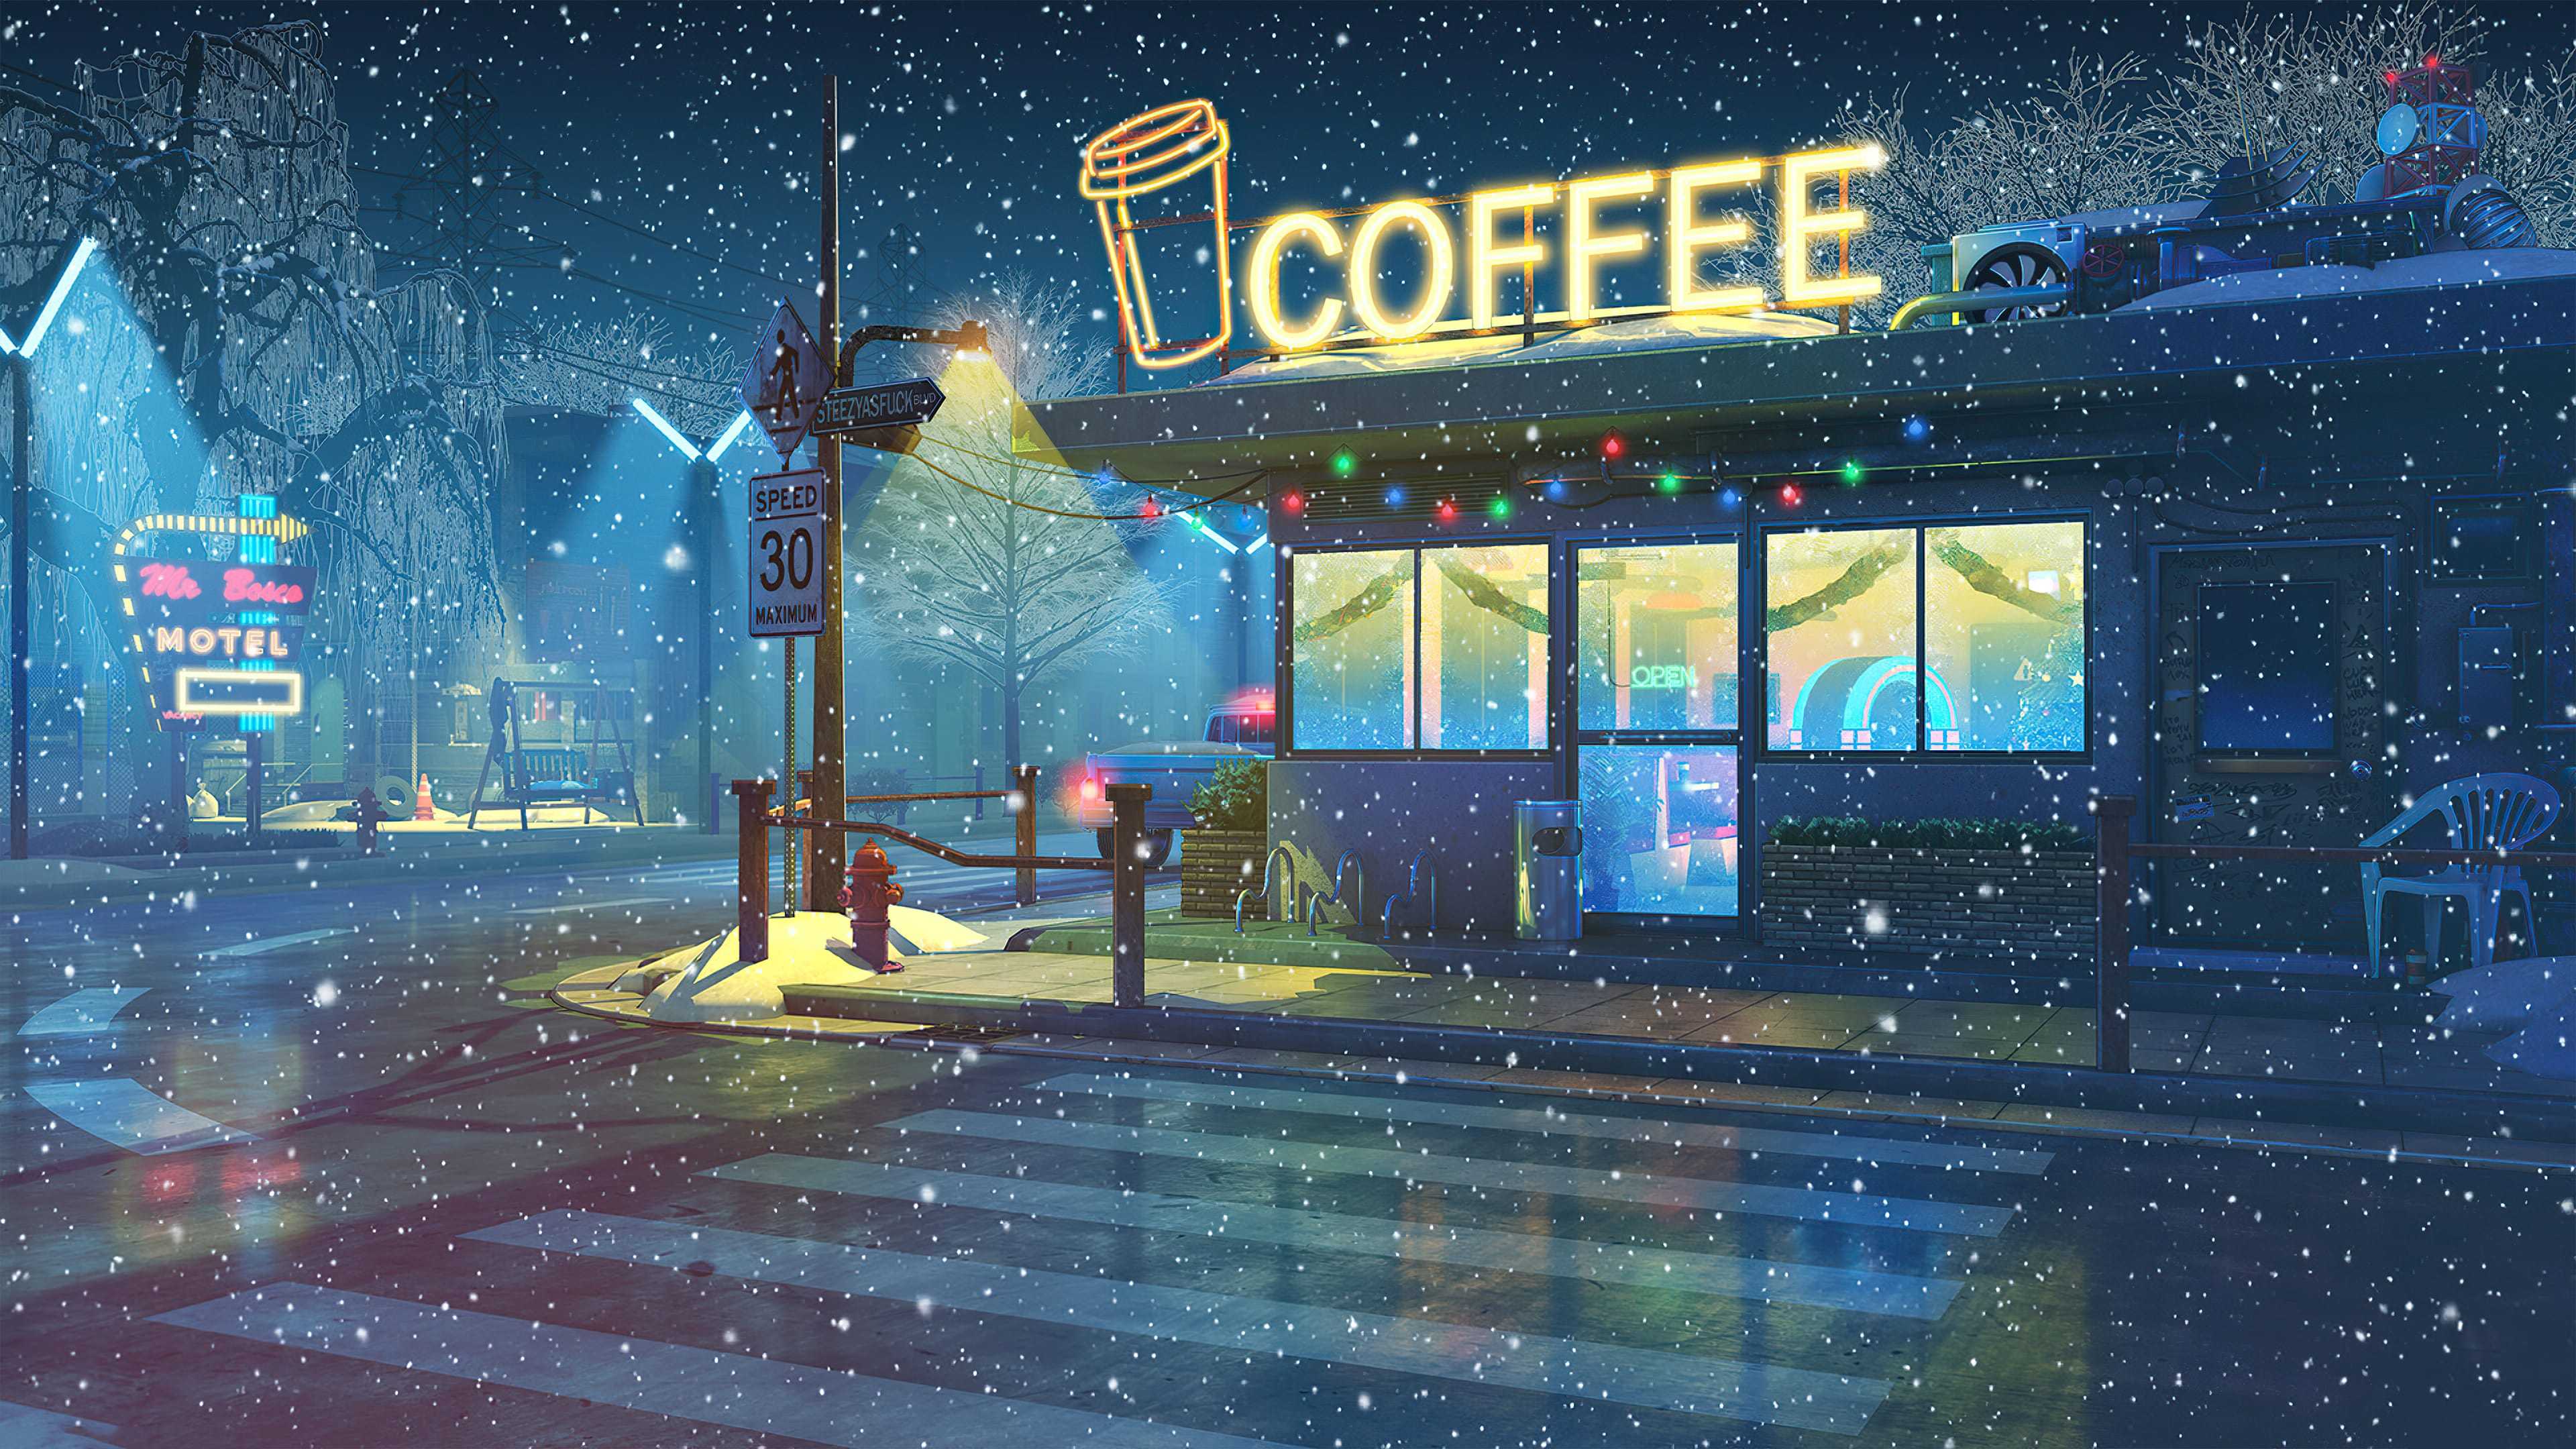 A coffee shop with a neon sign that says COFFEE. - Lo fi